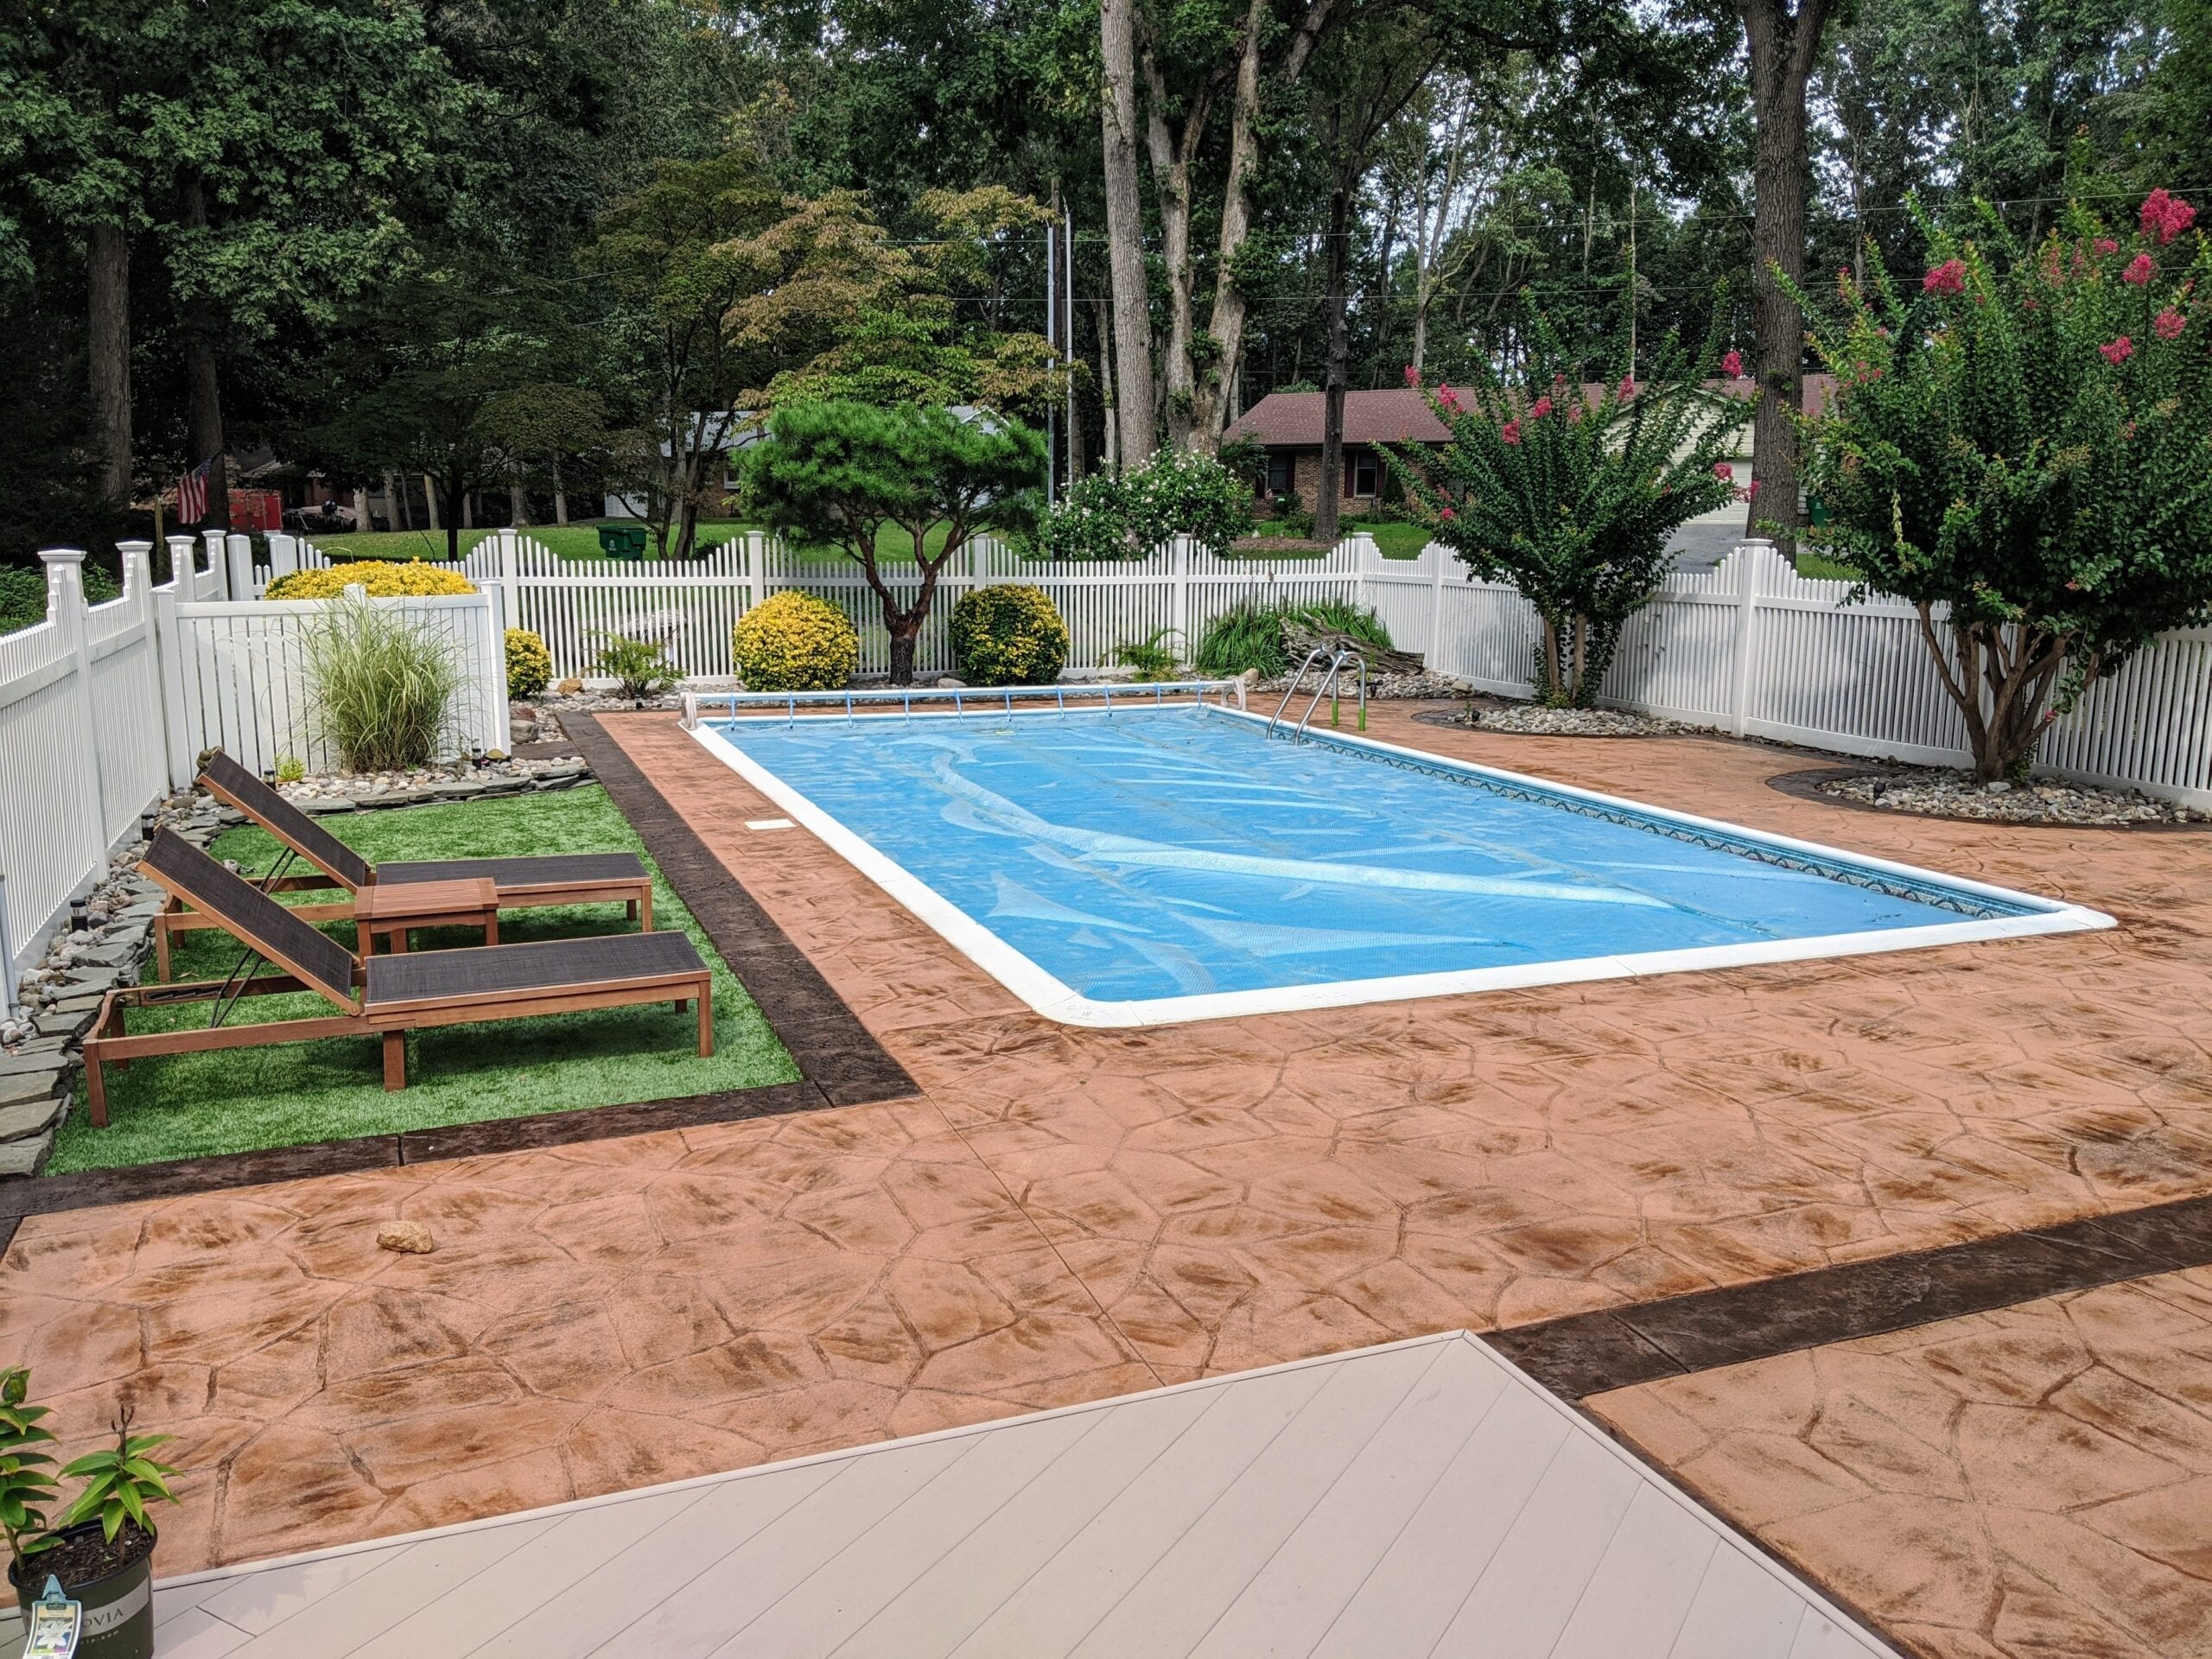 A Poolside Masterpiece: The elegant transformation of the once-drab stamped concrete pool deck, now adorned with a sophisticated stain and sealed for lasting beauty and safety